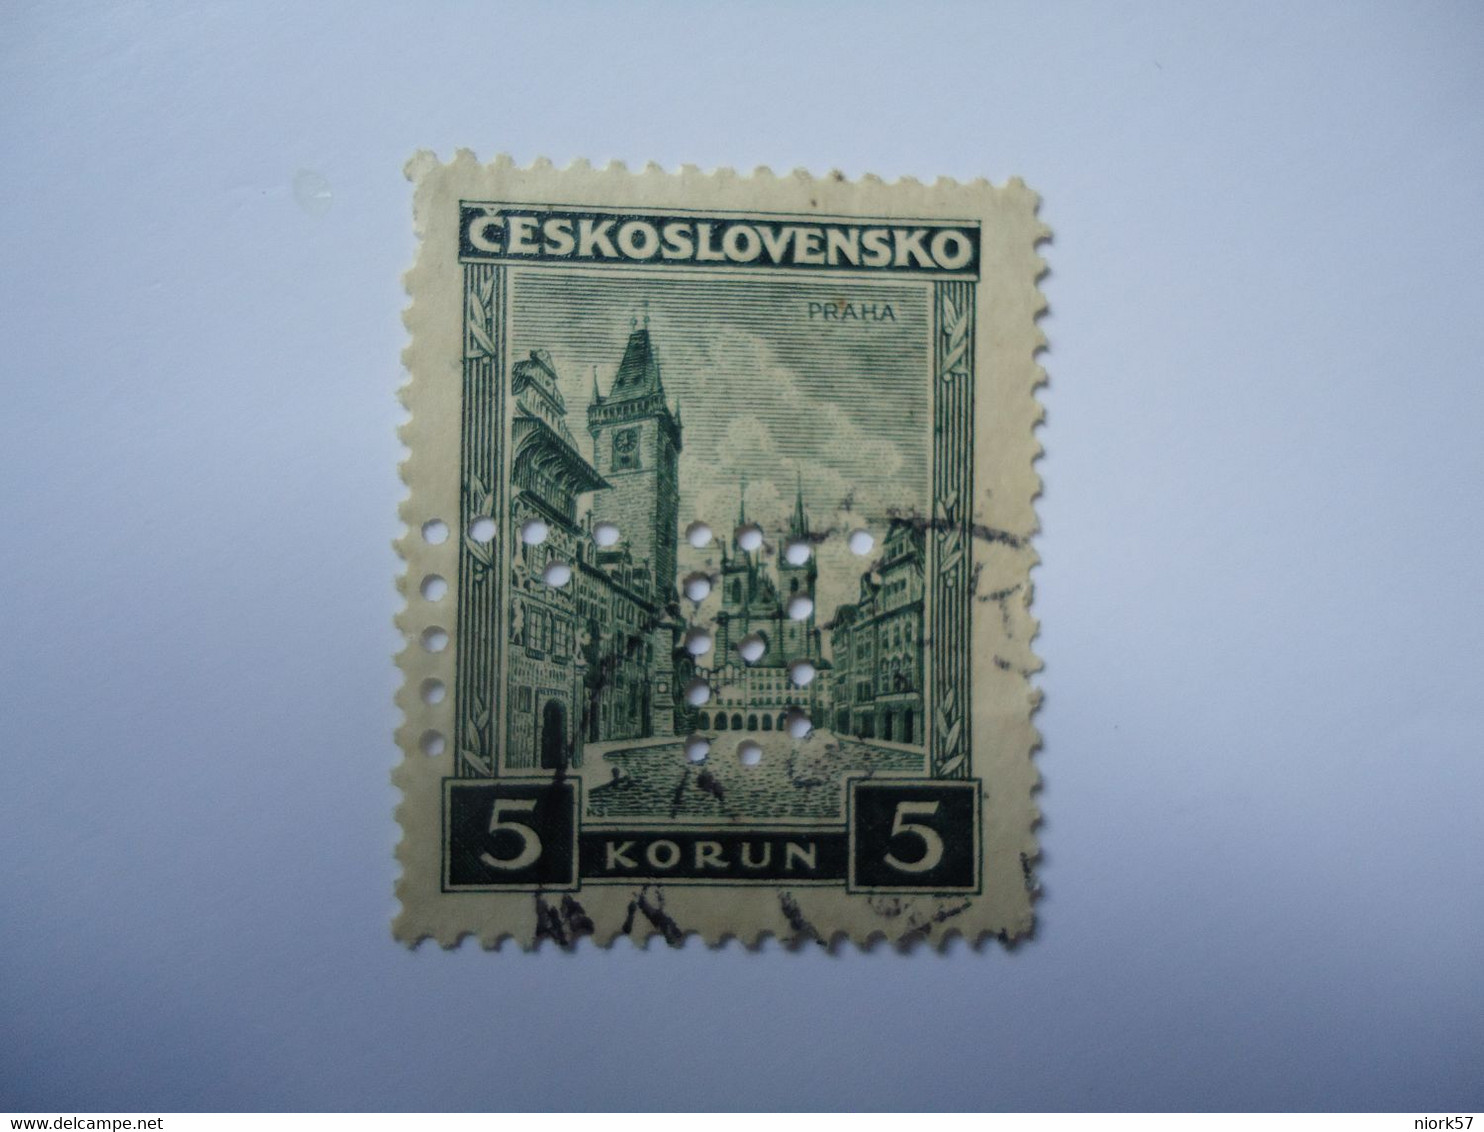 CZECHOSLOVAKIA    USED STAMPS WITH PERFINS  2 SCAN  WITH POSTMARK - Ensayos & Reimpresiones